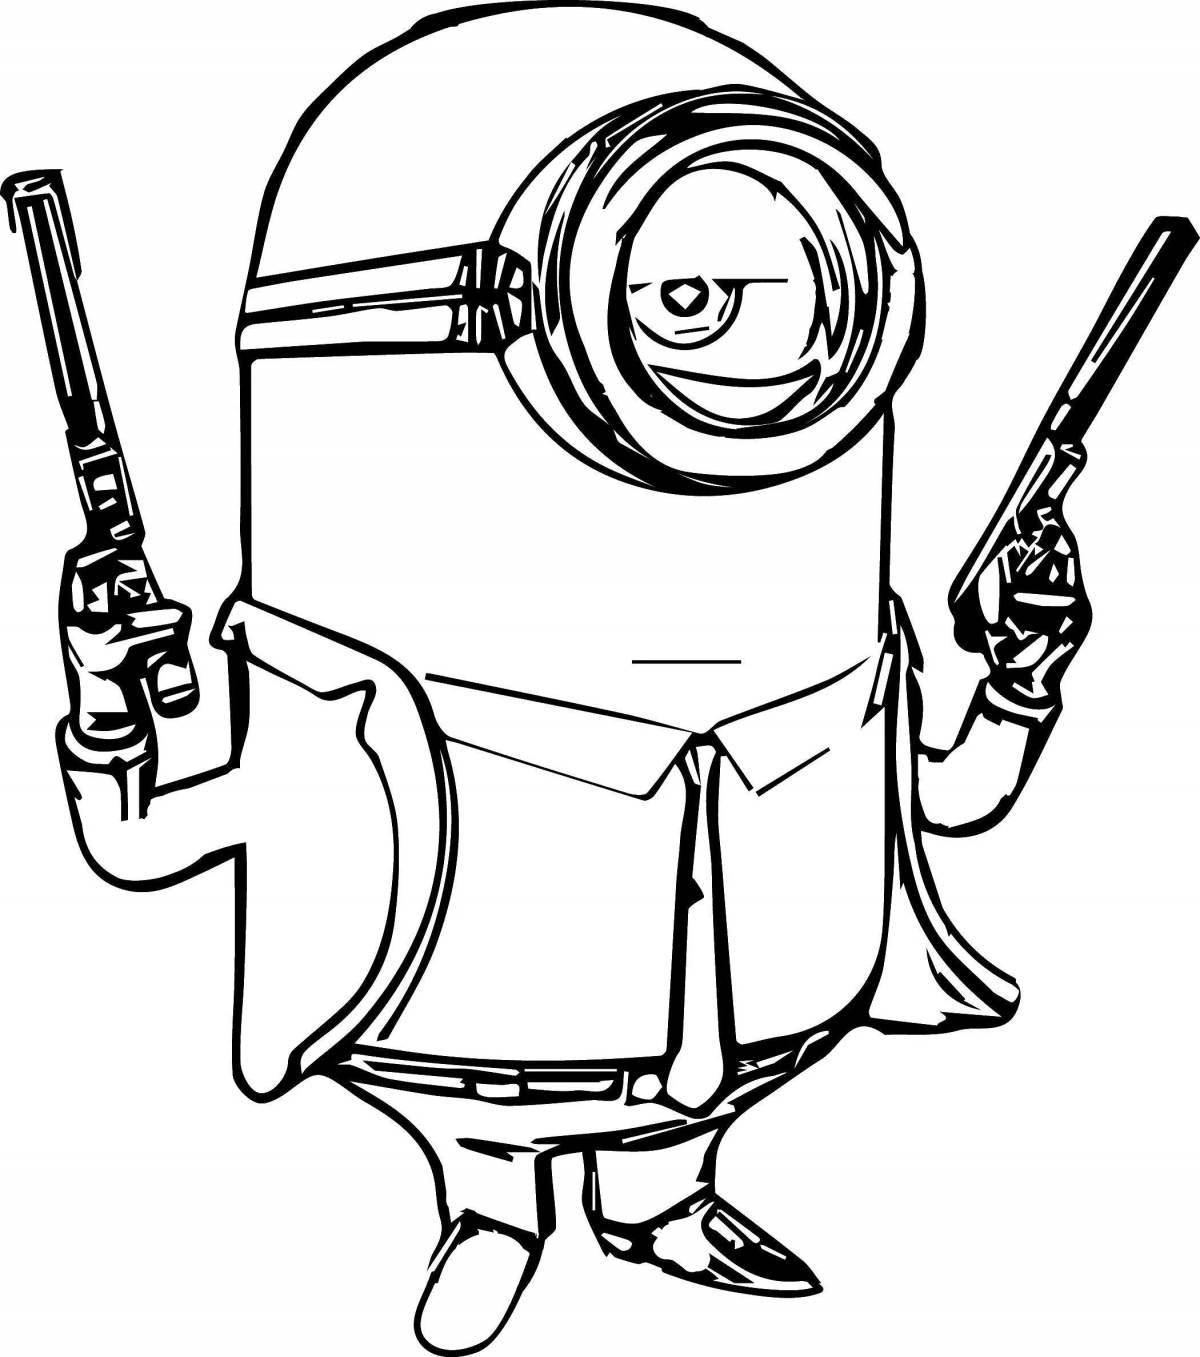 Colorful spy kids coloring page